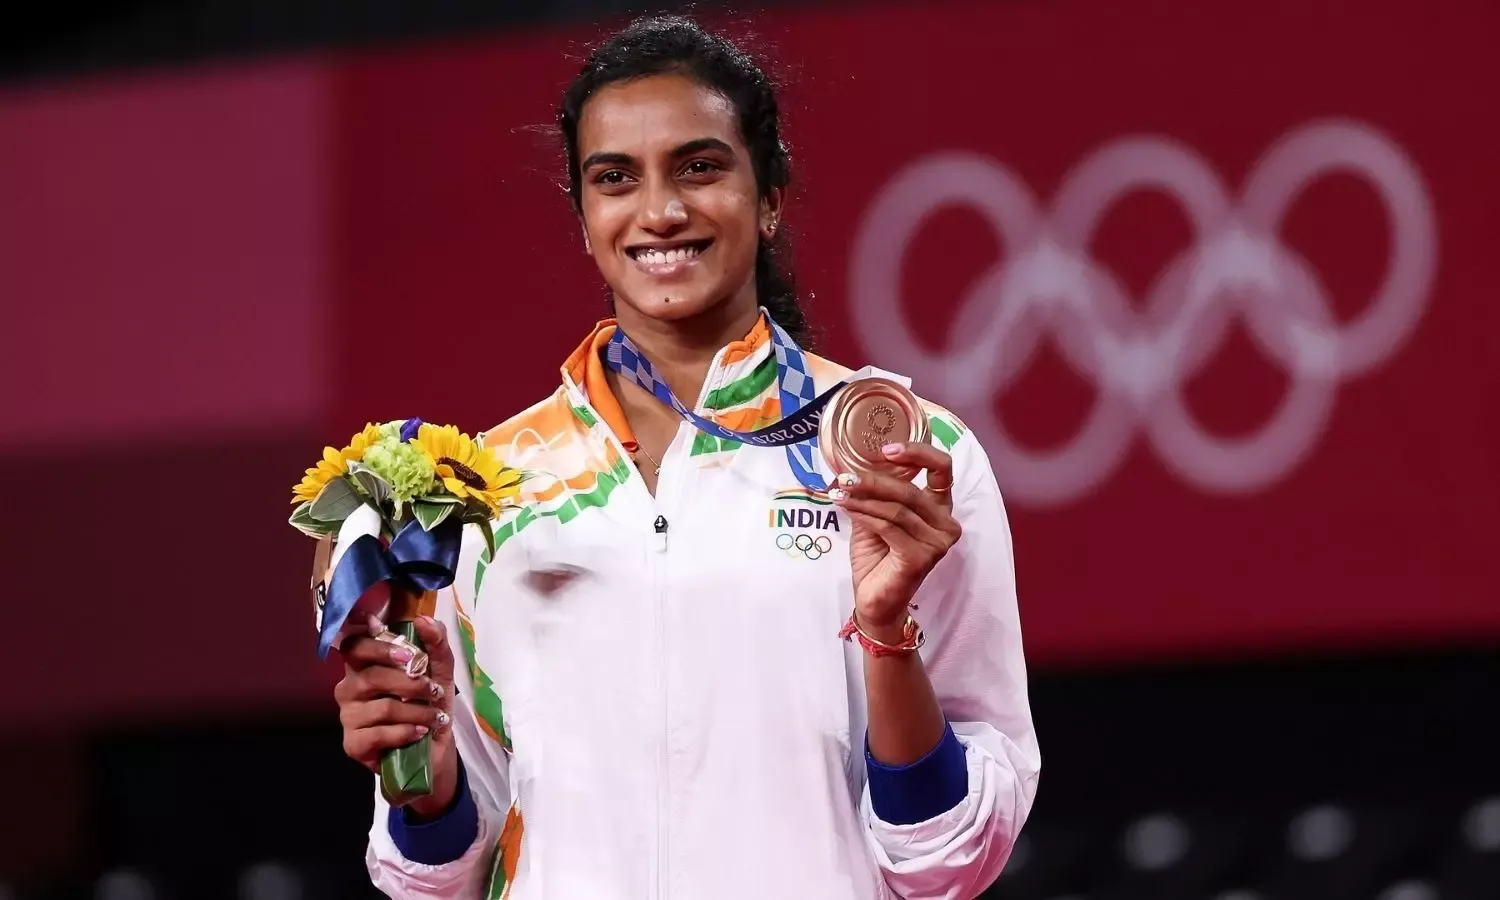 India at Olympics: India's medals at the Olympics by sports